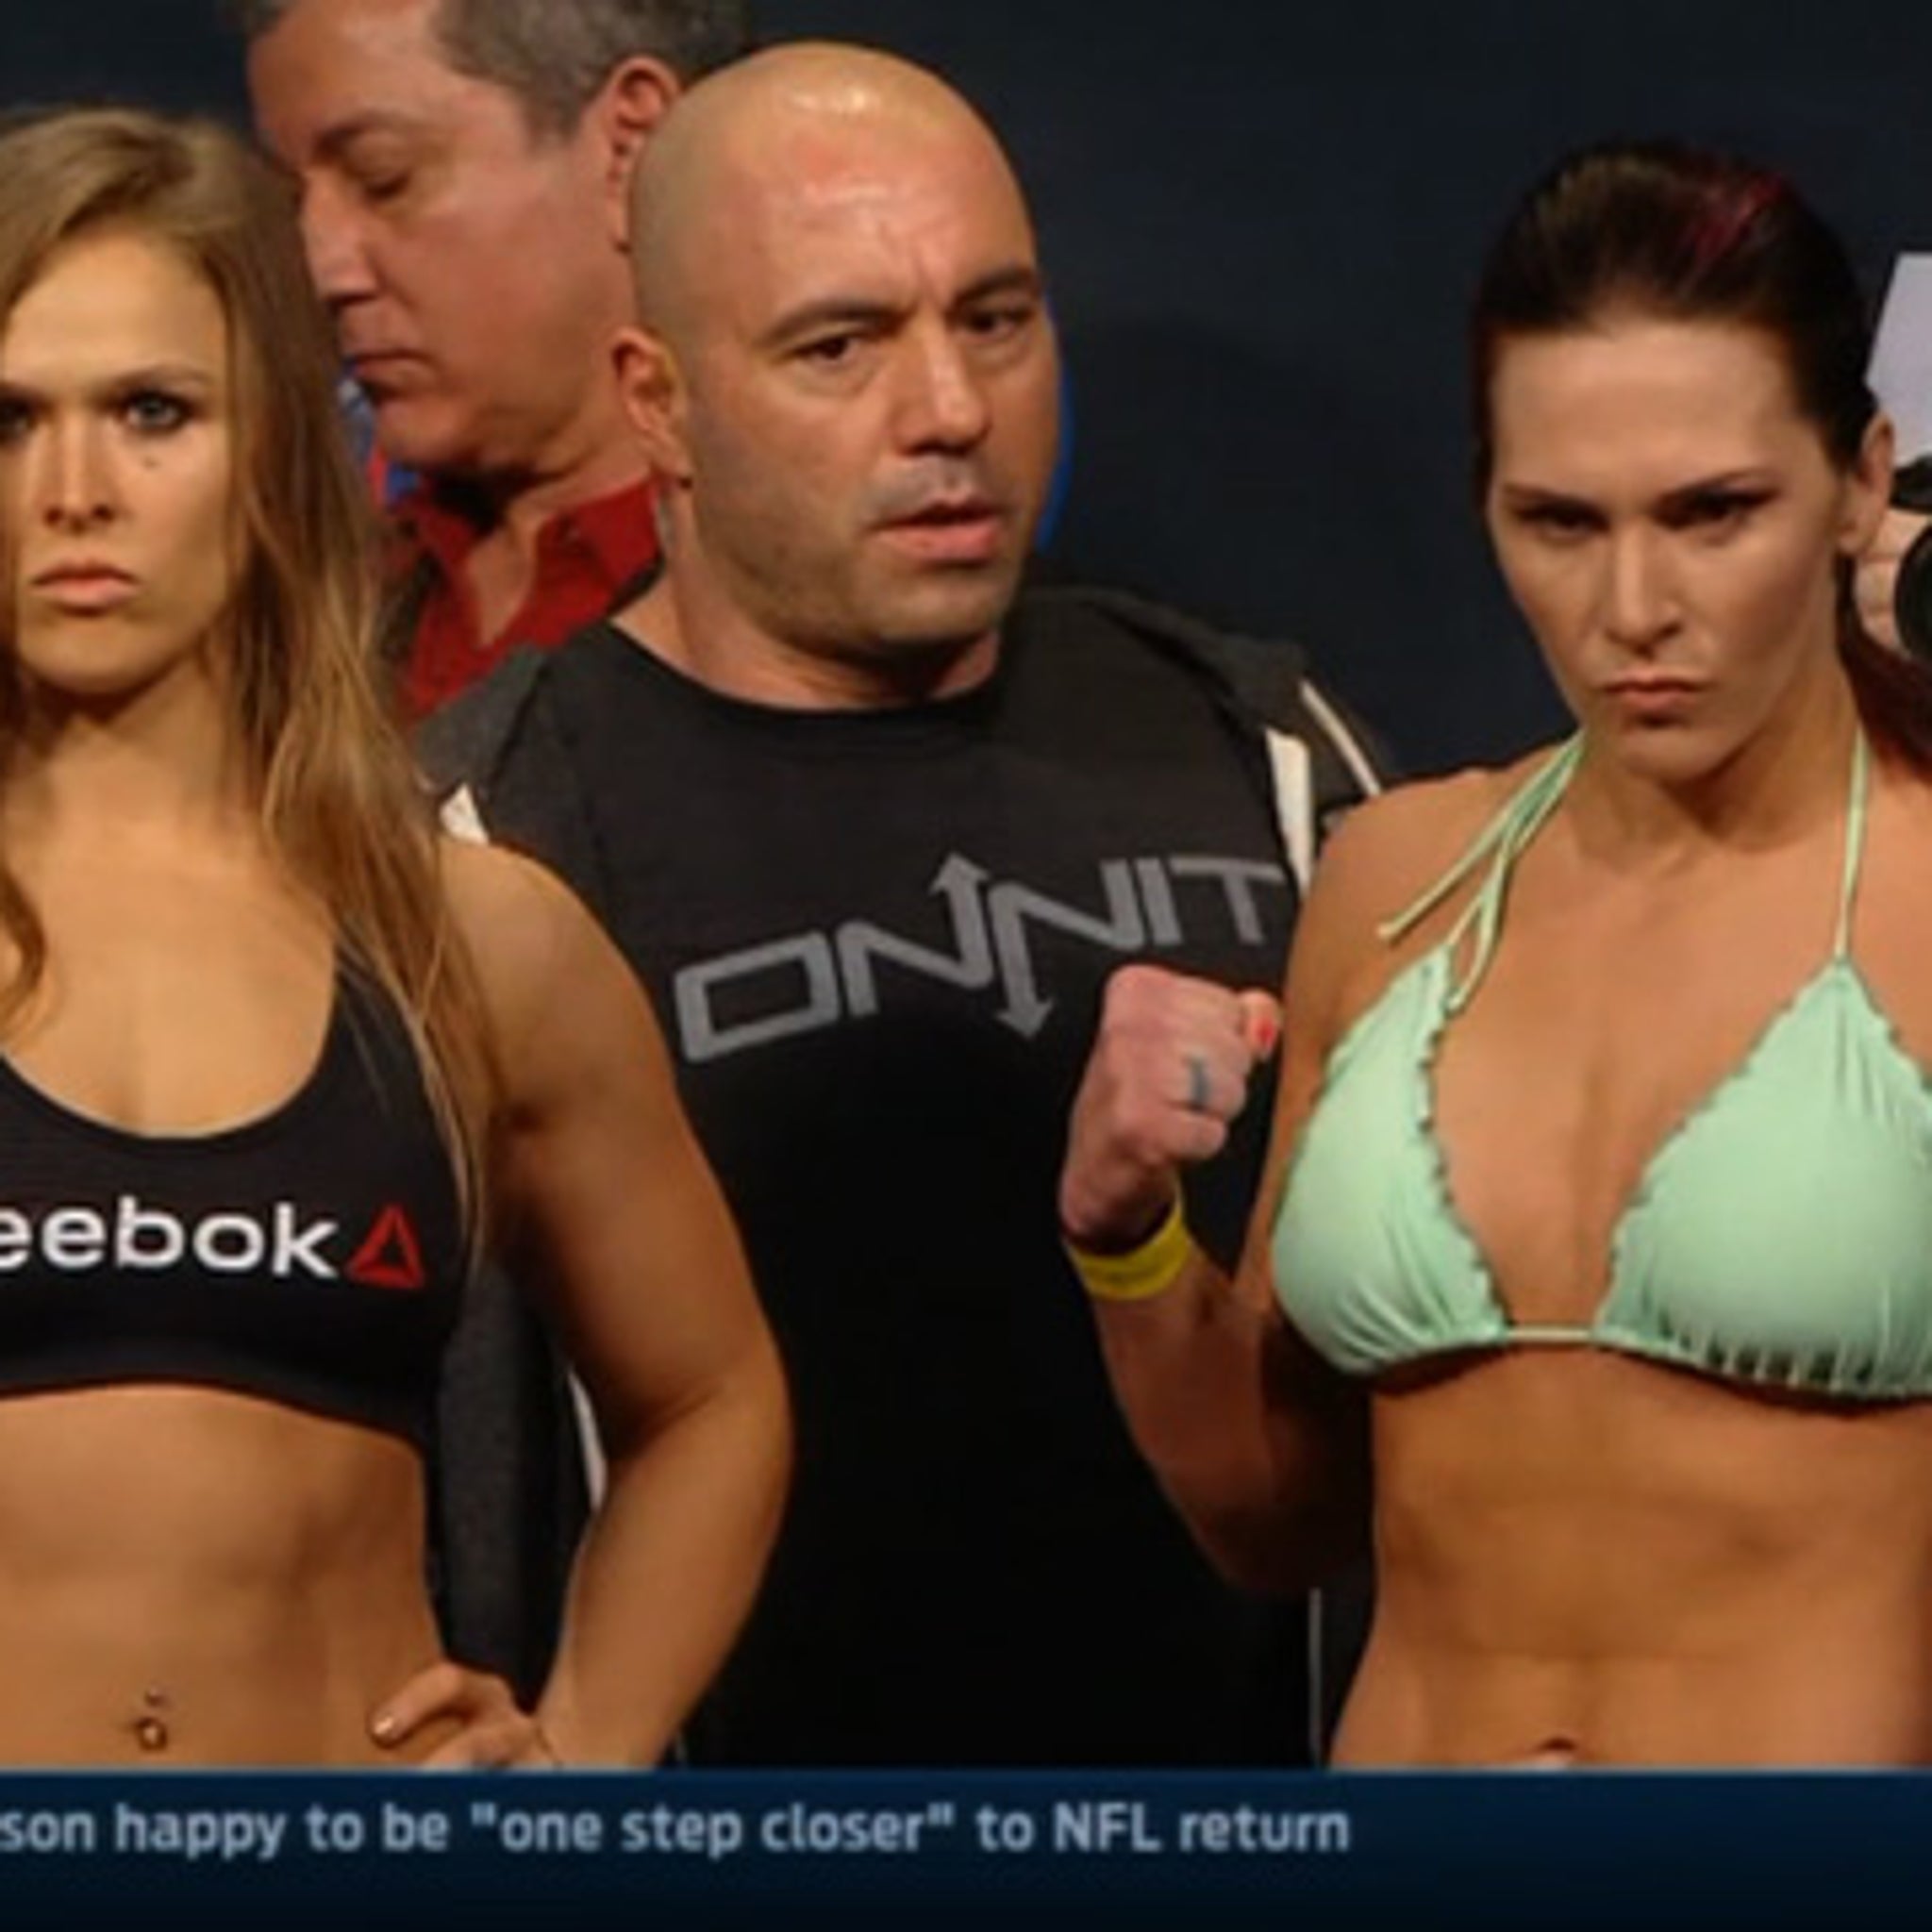 cassy ann recommends ronda rousey nude weigh in pic